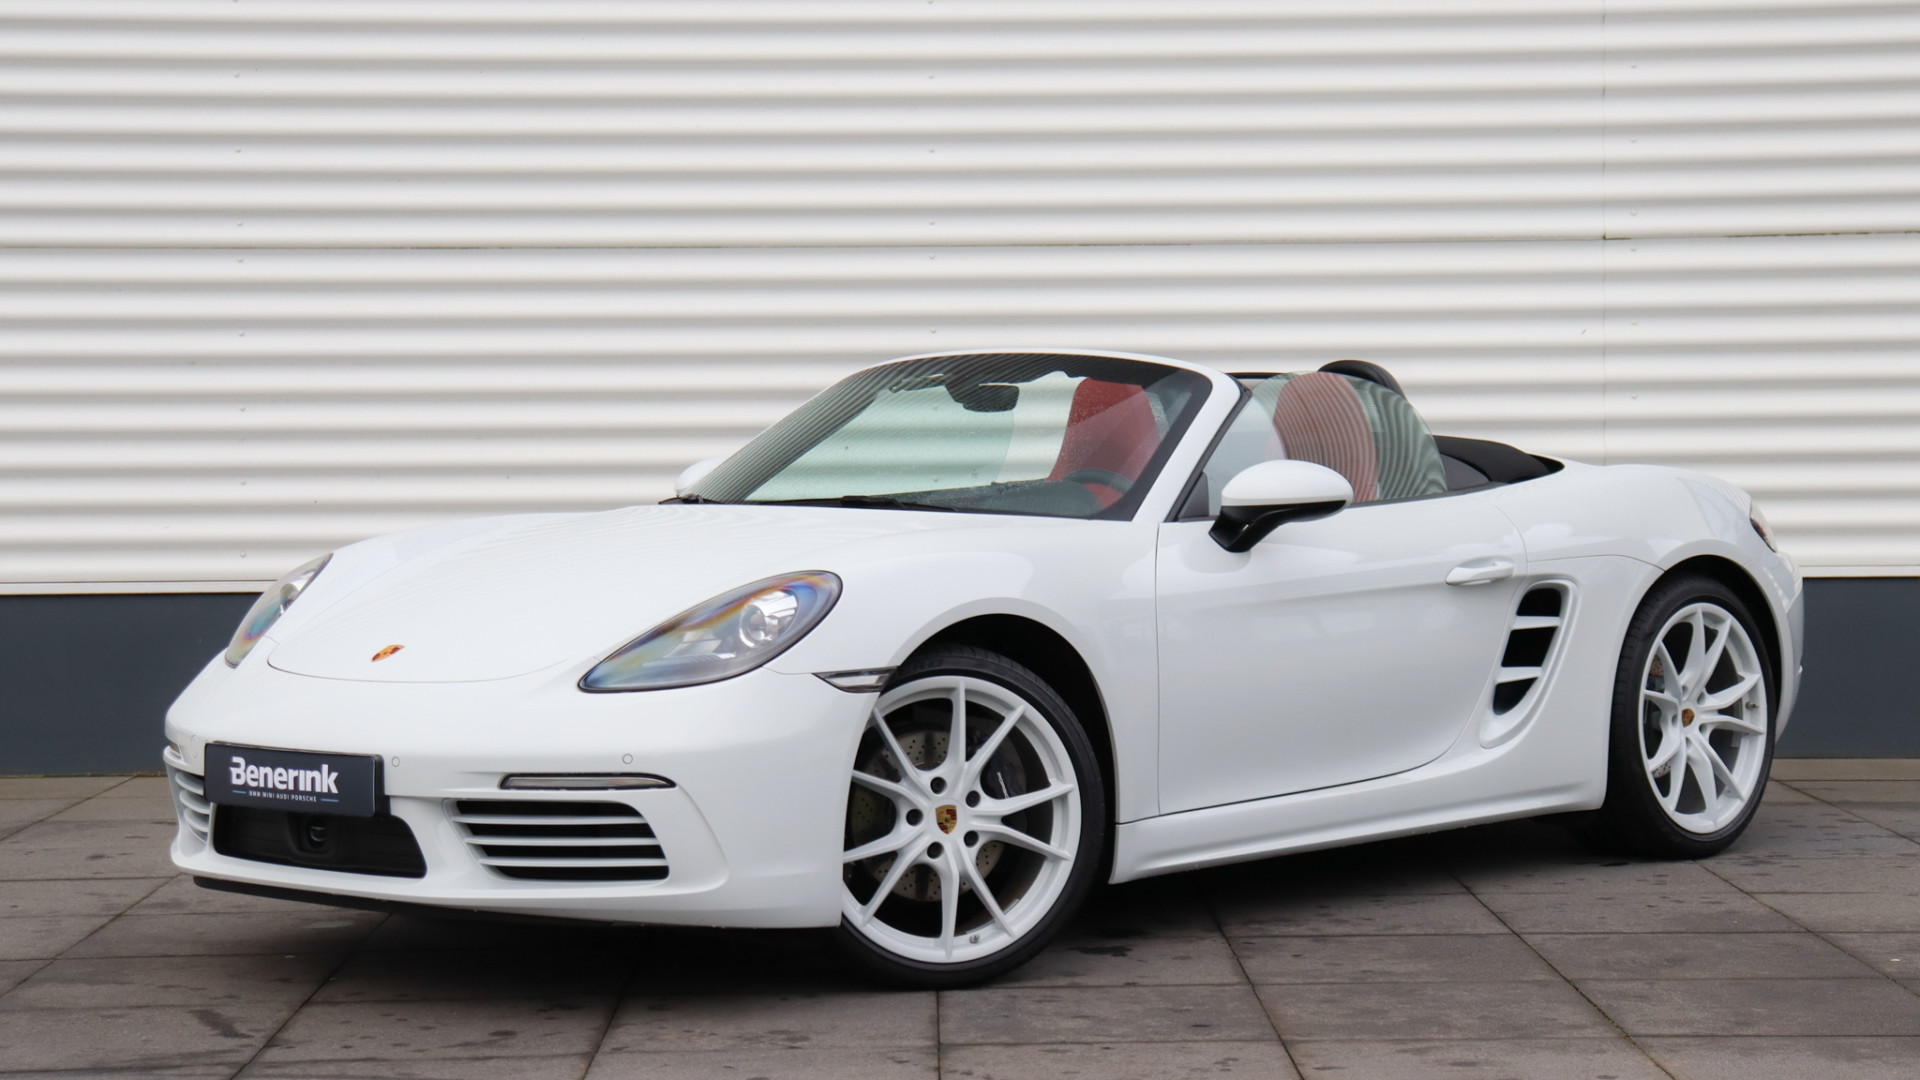 Benerink - 718 Boxster 2.0